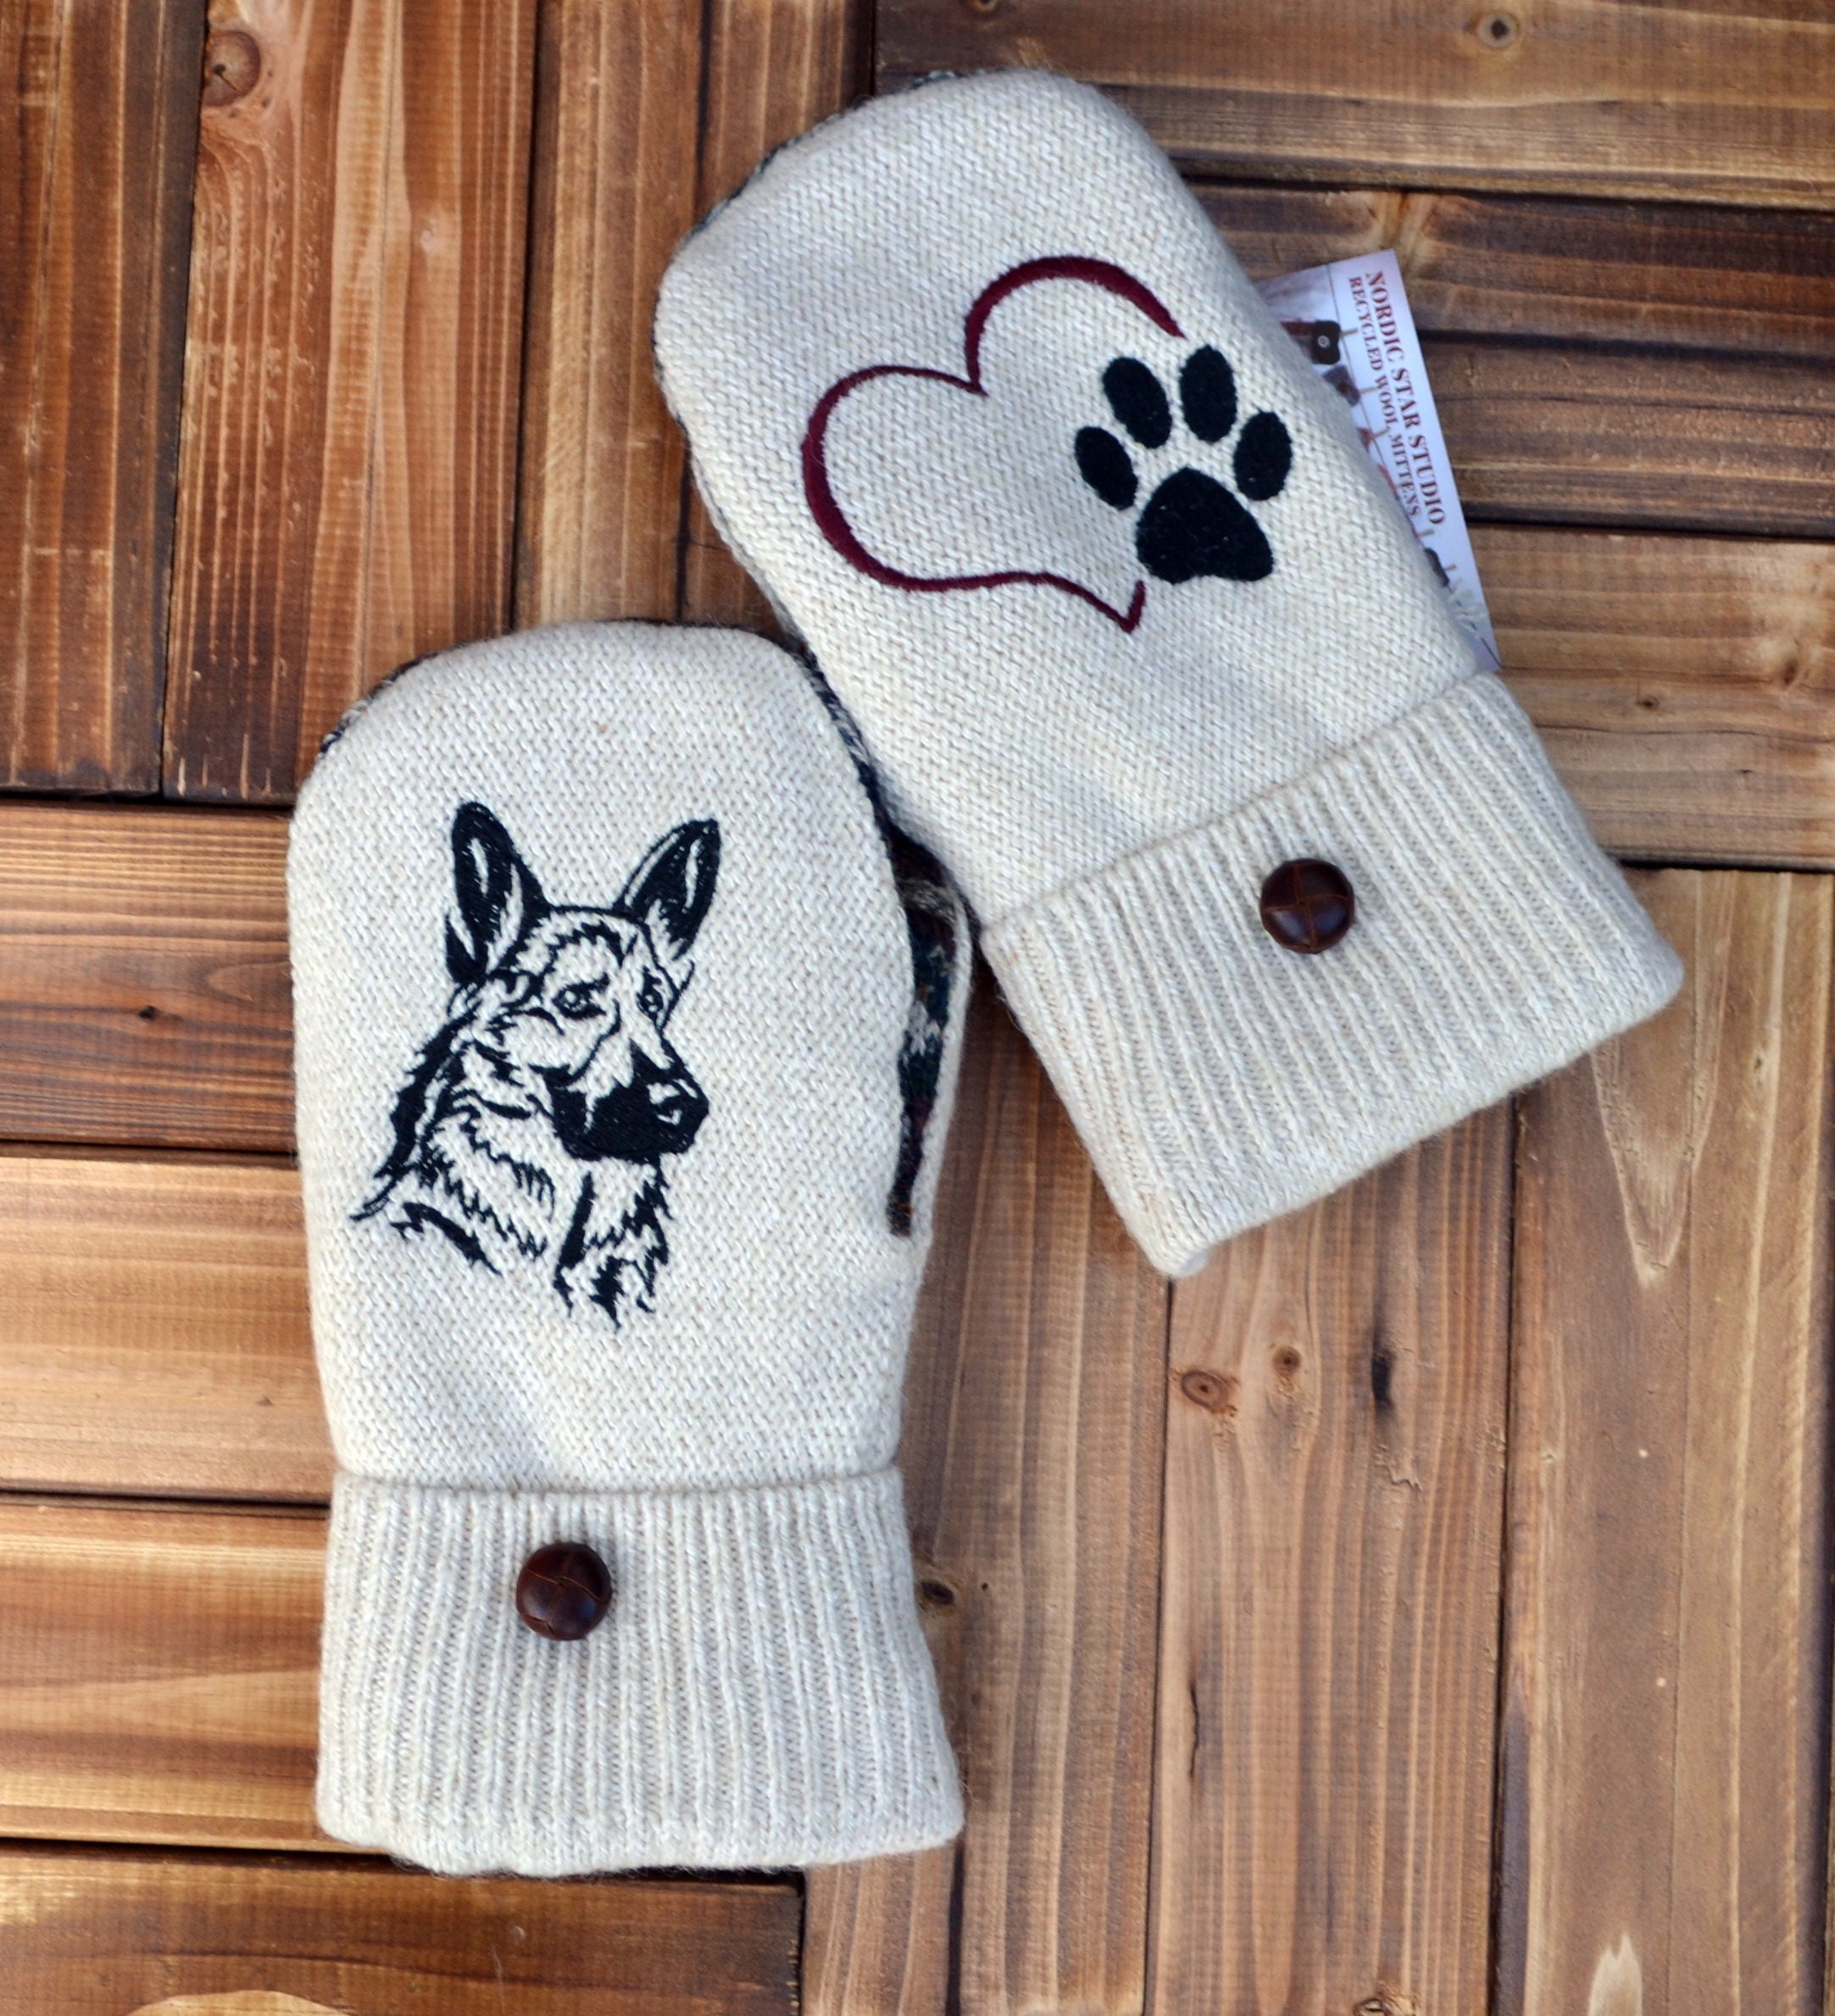 Recycled Upcycled wool sweater Paw Fleece Lined Dog Lover Gift Handmade WOOL MITTENS Dalmatian Dog Embroidered